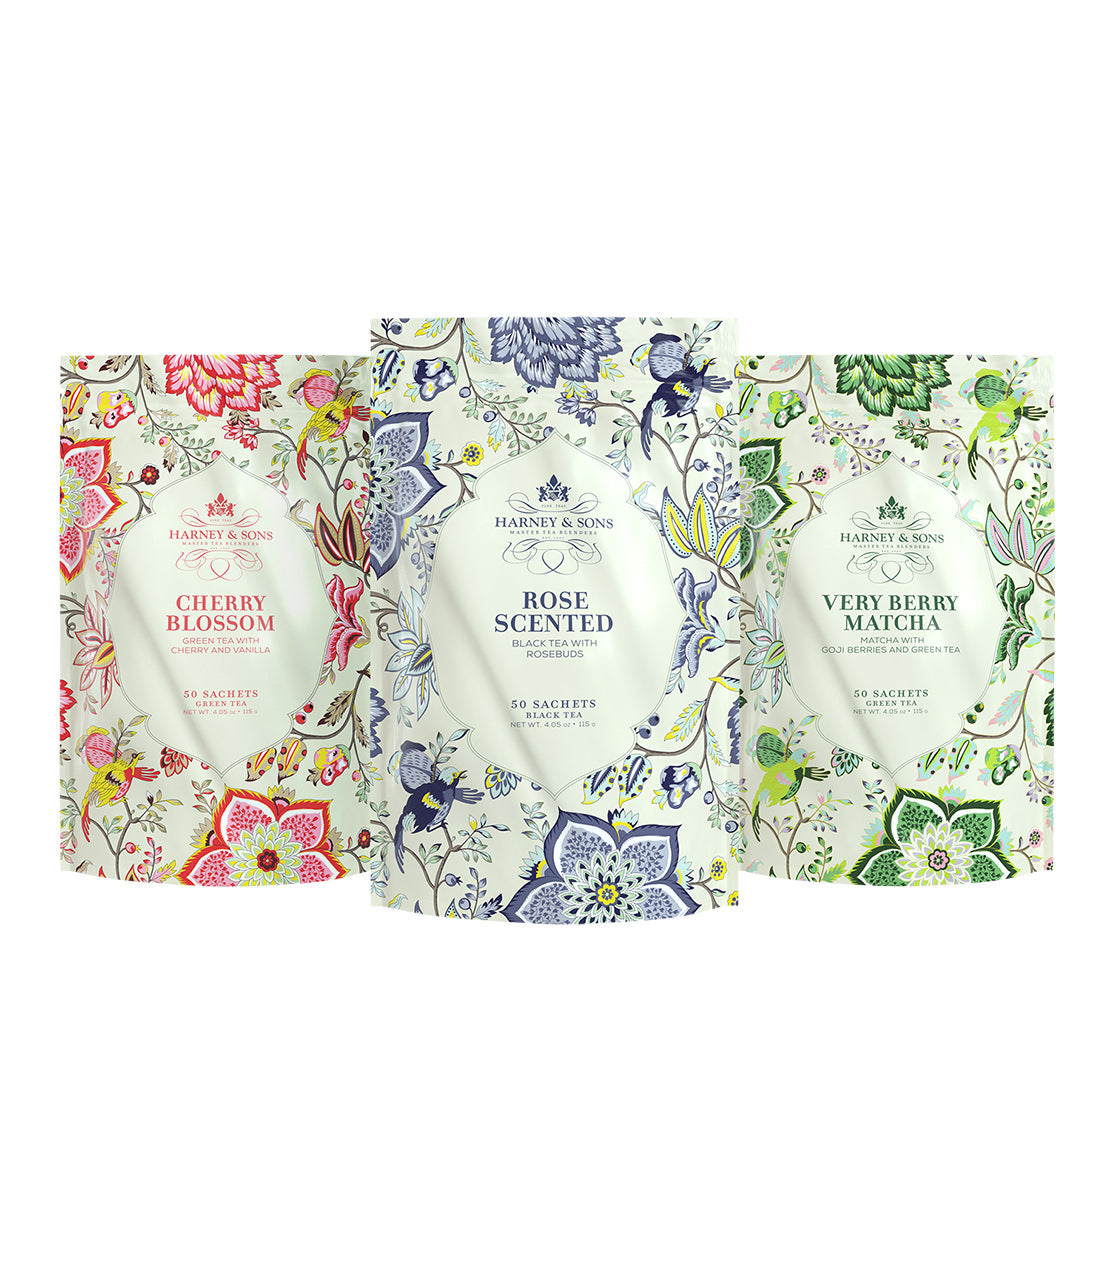 Spring Bloom Trio - 3 Bags of 50 sachets - Sachets 3 Bags of 50 Sachets - Harney & Sons Fine Teas